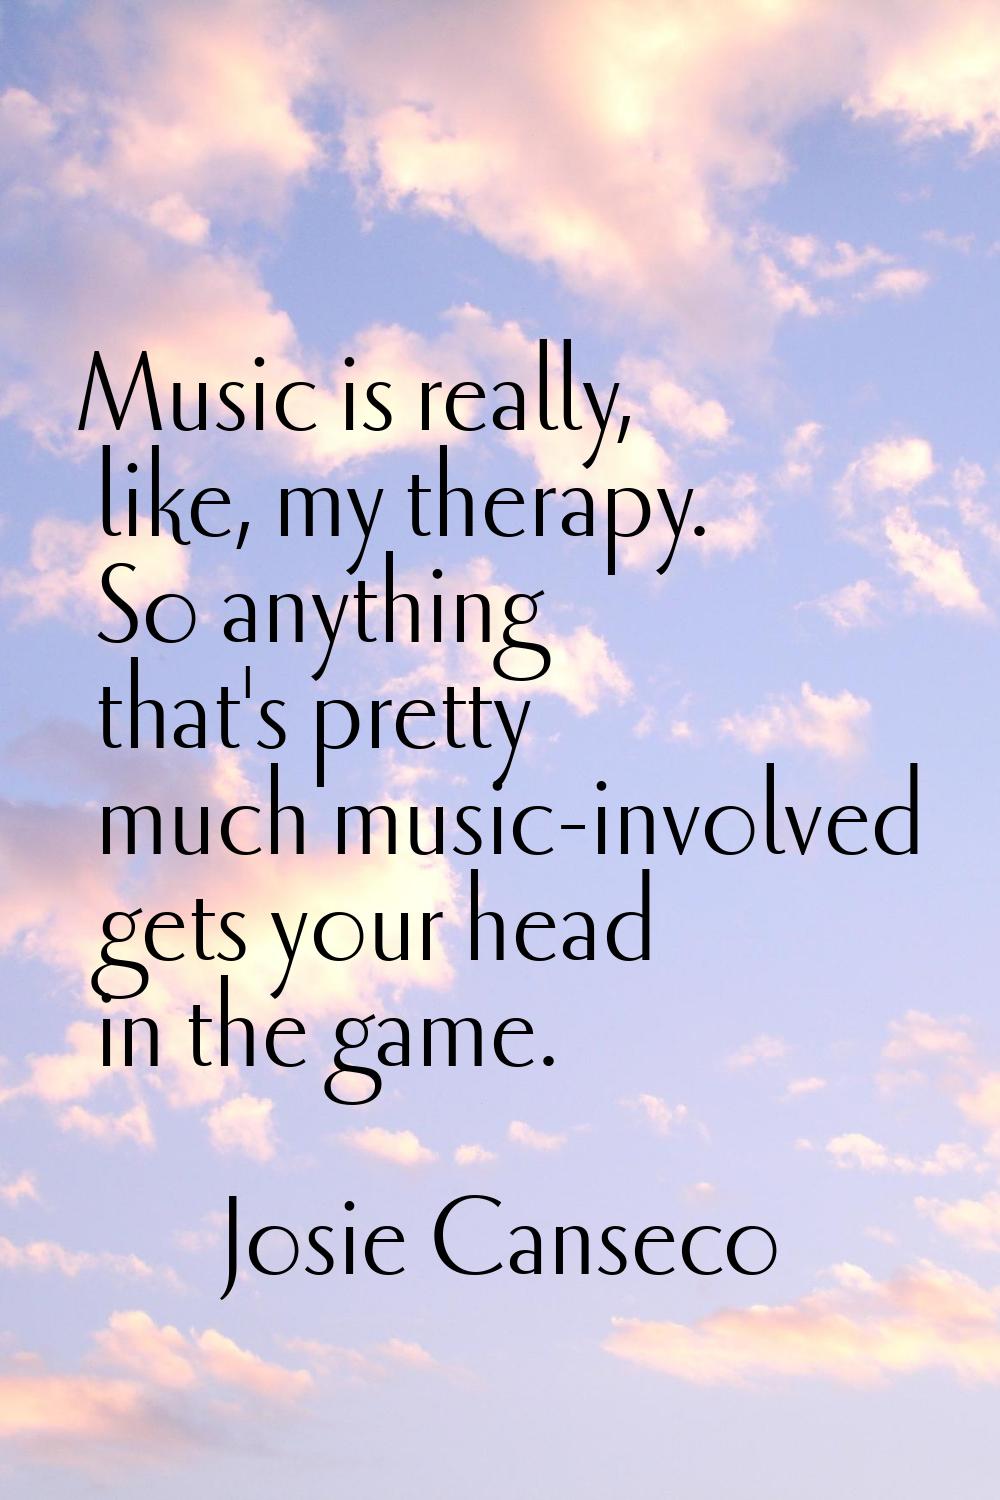 Music is really, like, my therapy. So anything that's pretty much music-involved gets your head in 